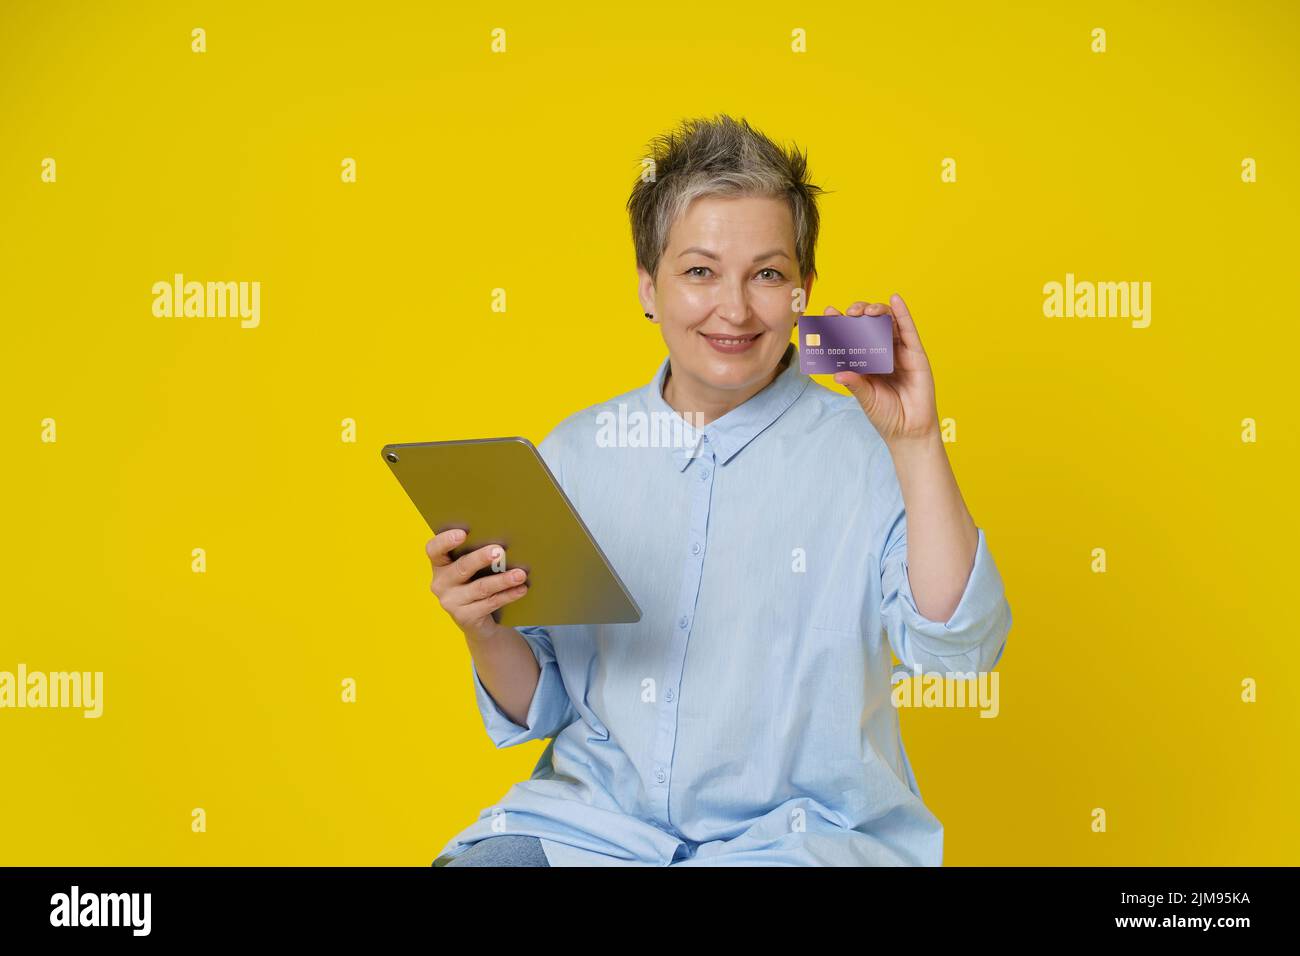 Mature woman with grey hair holding credit, debit card and tablet pc in hand making online payment or shopping online, isolated on yellow background. E-commerce, online banking concept. Stock Photo